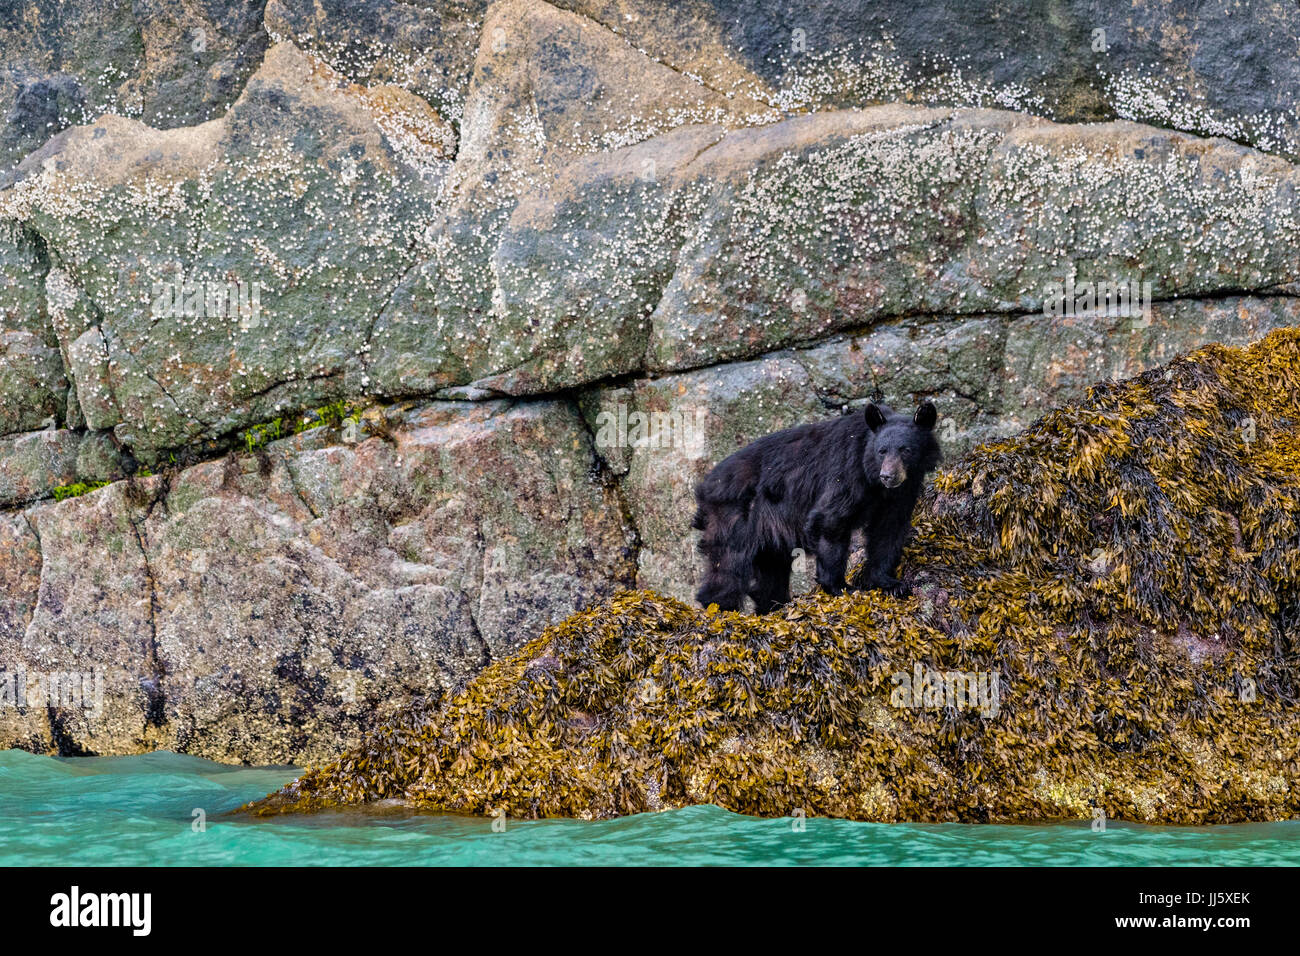 Black bear standing in seaweed near waterline at low tide along the steep cliffs in Knight Inlet, British Columbia, Canada. Stock Photo